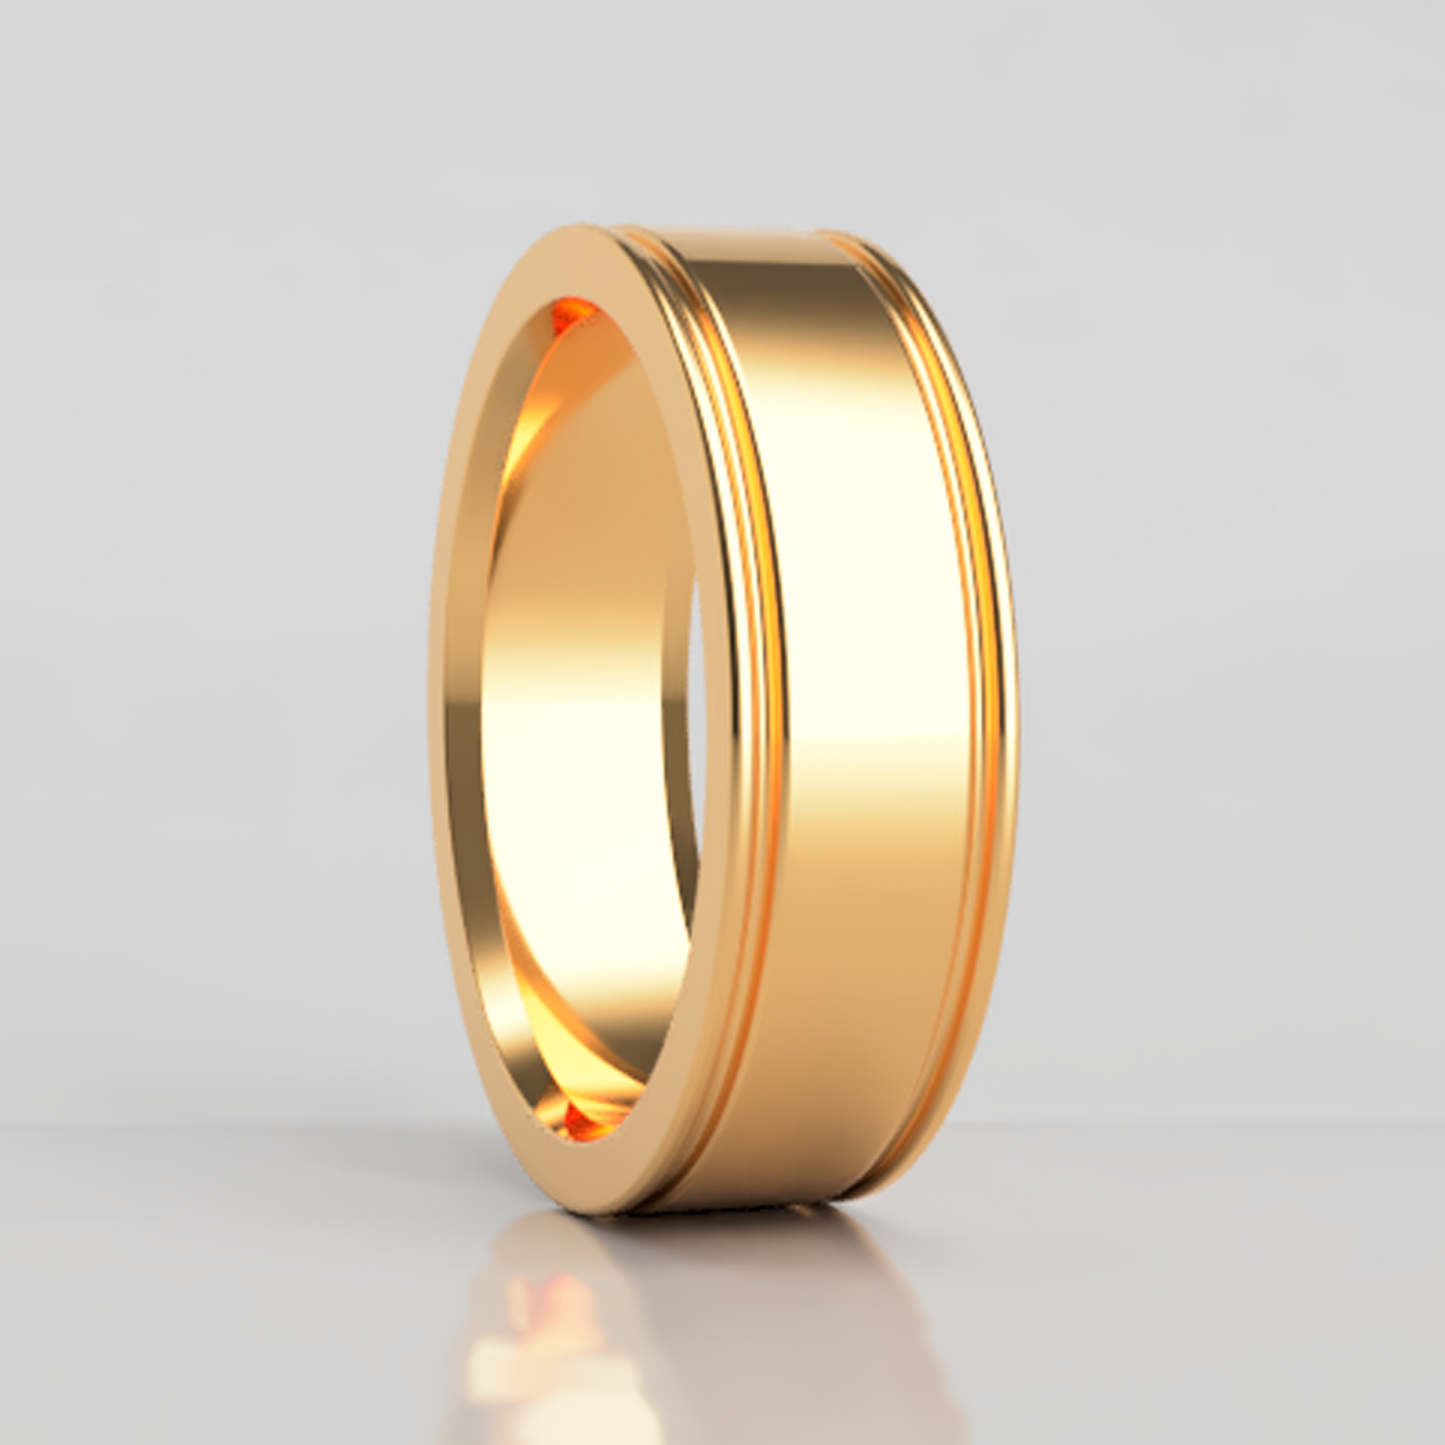 A 18k gold wedding band with grooved edges displayed on a neutral white background.